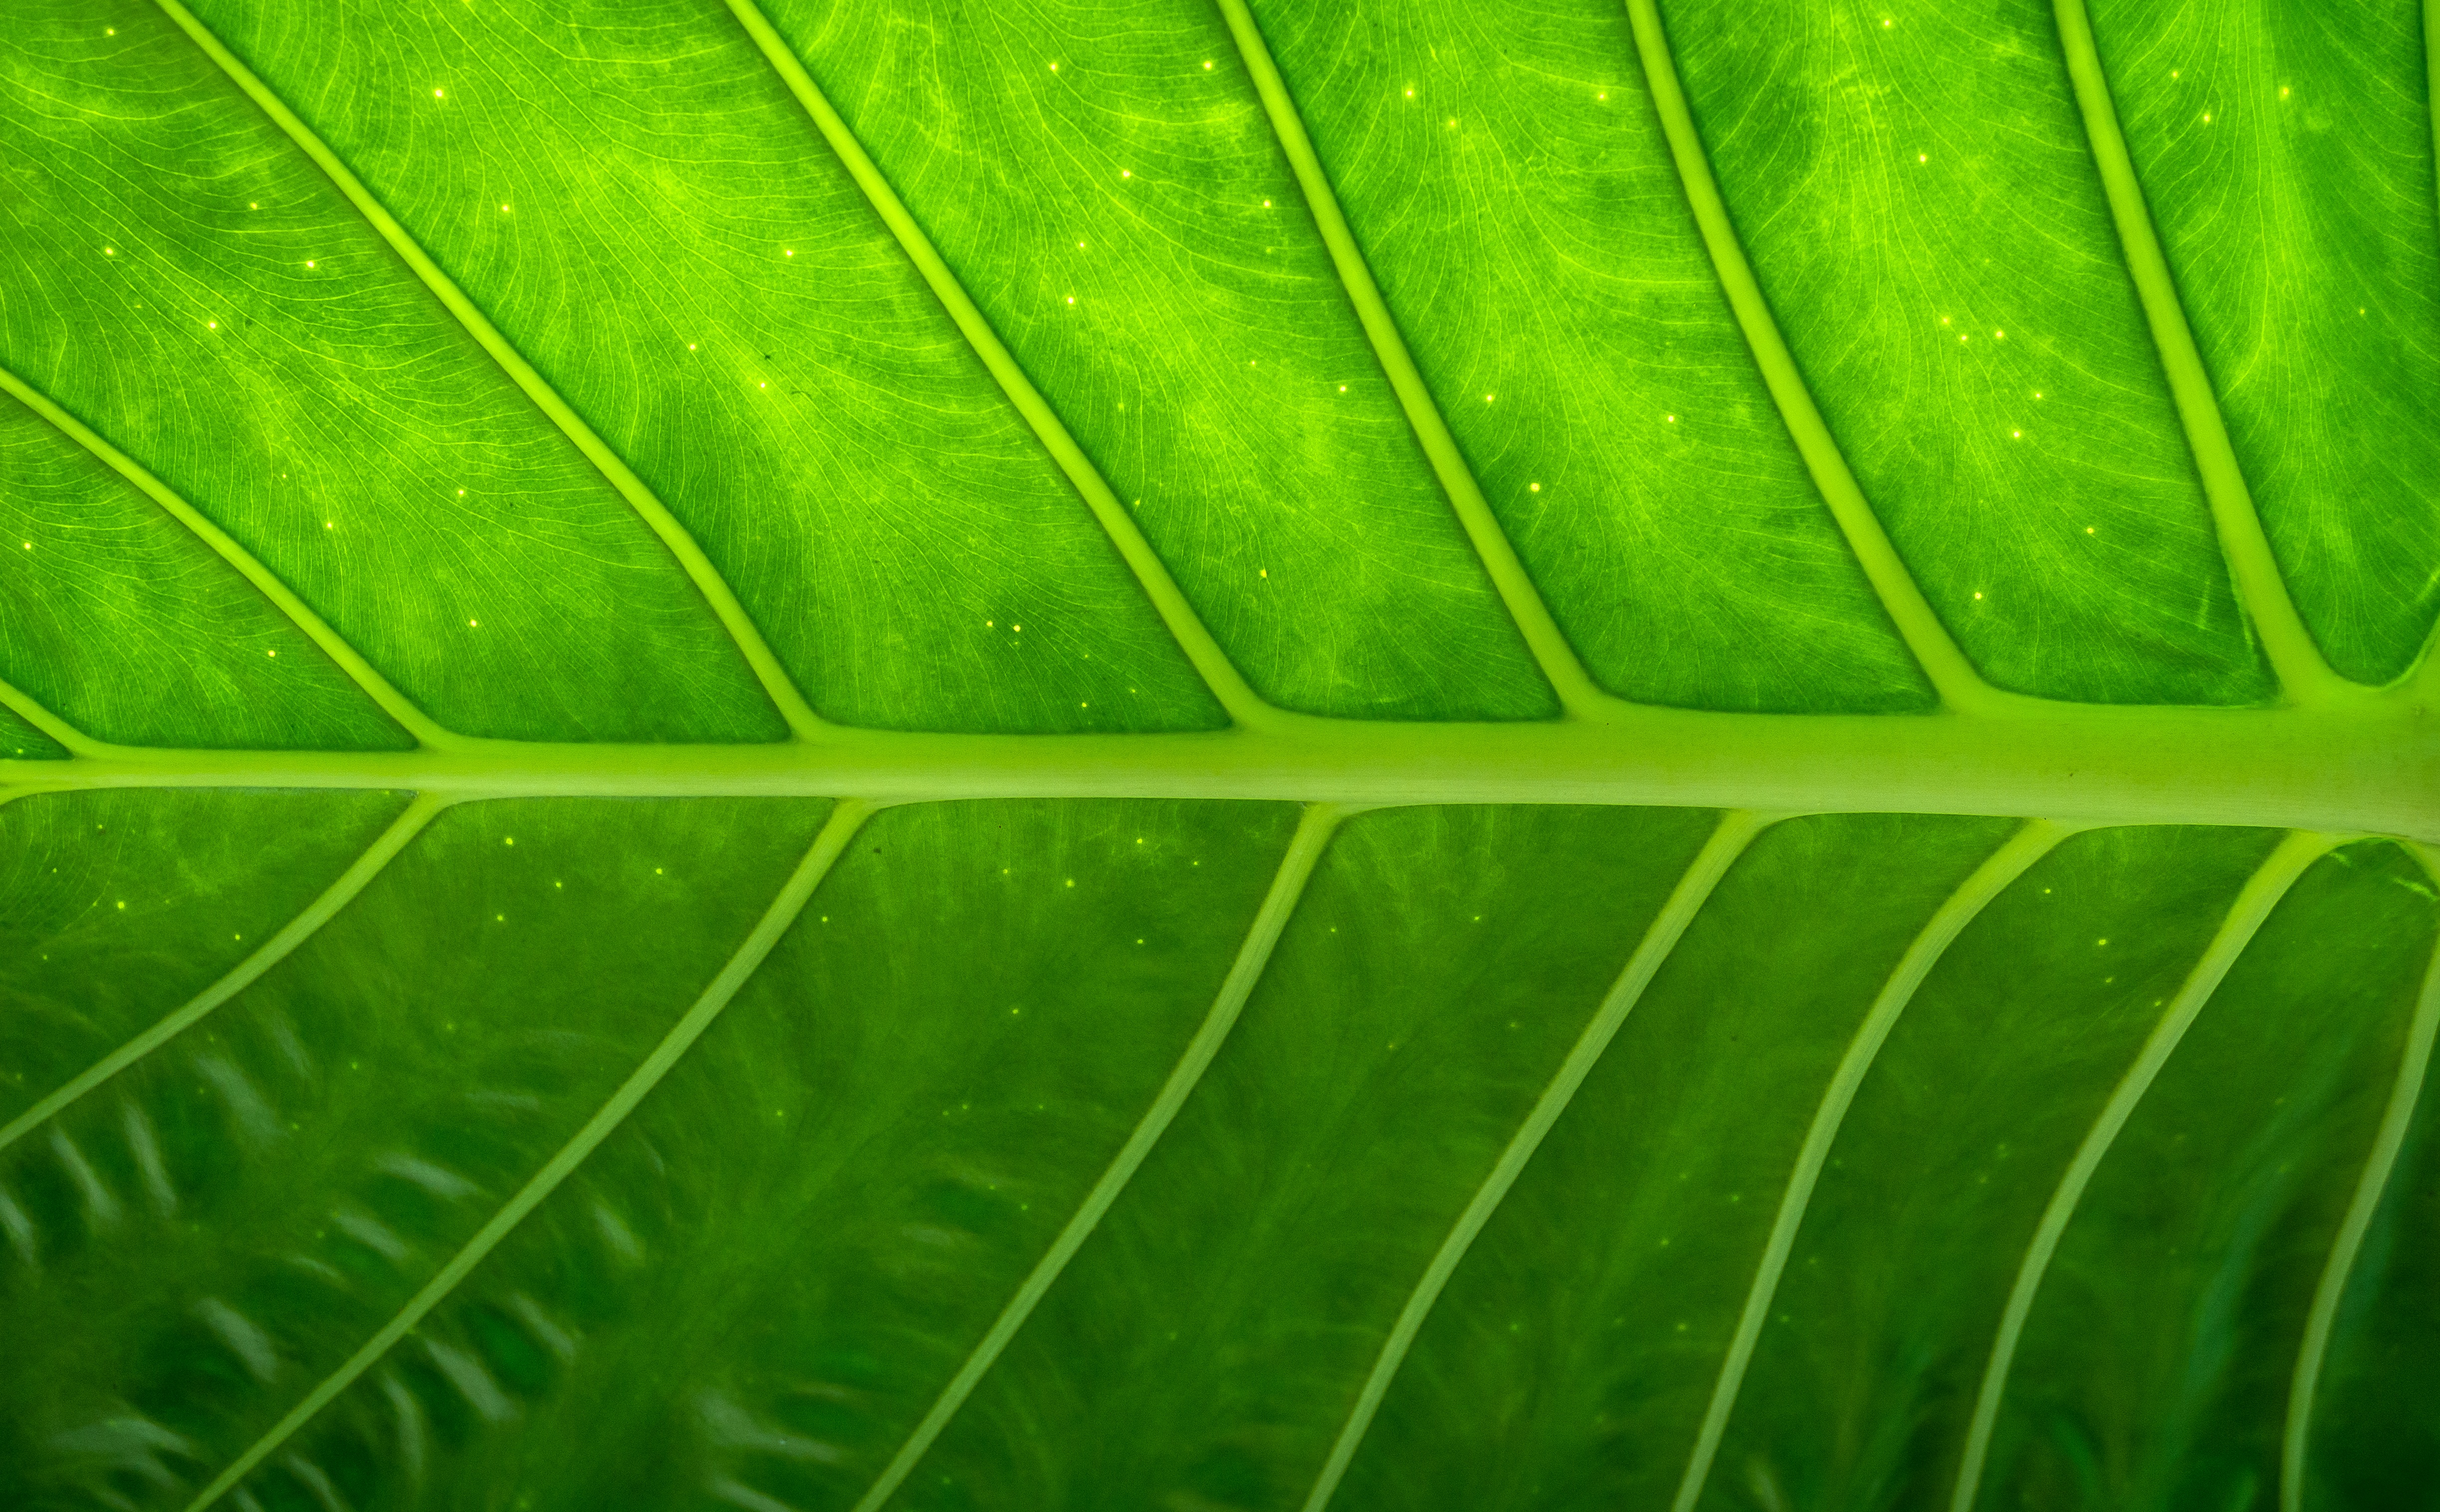 Wallpaper with green leaf texture free image download